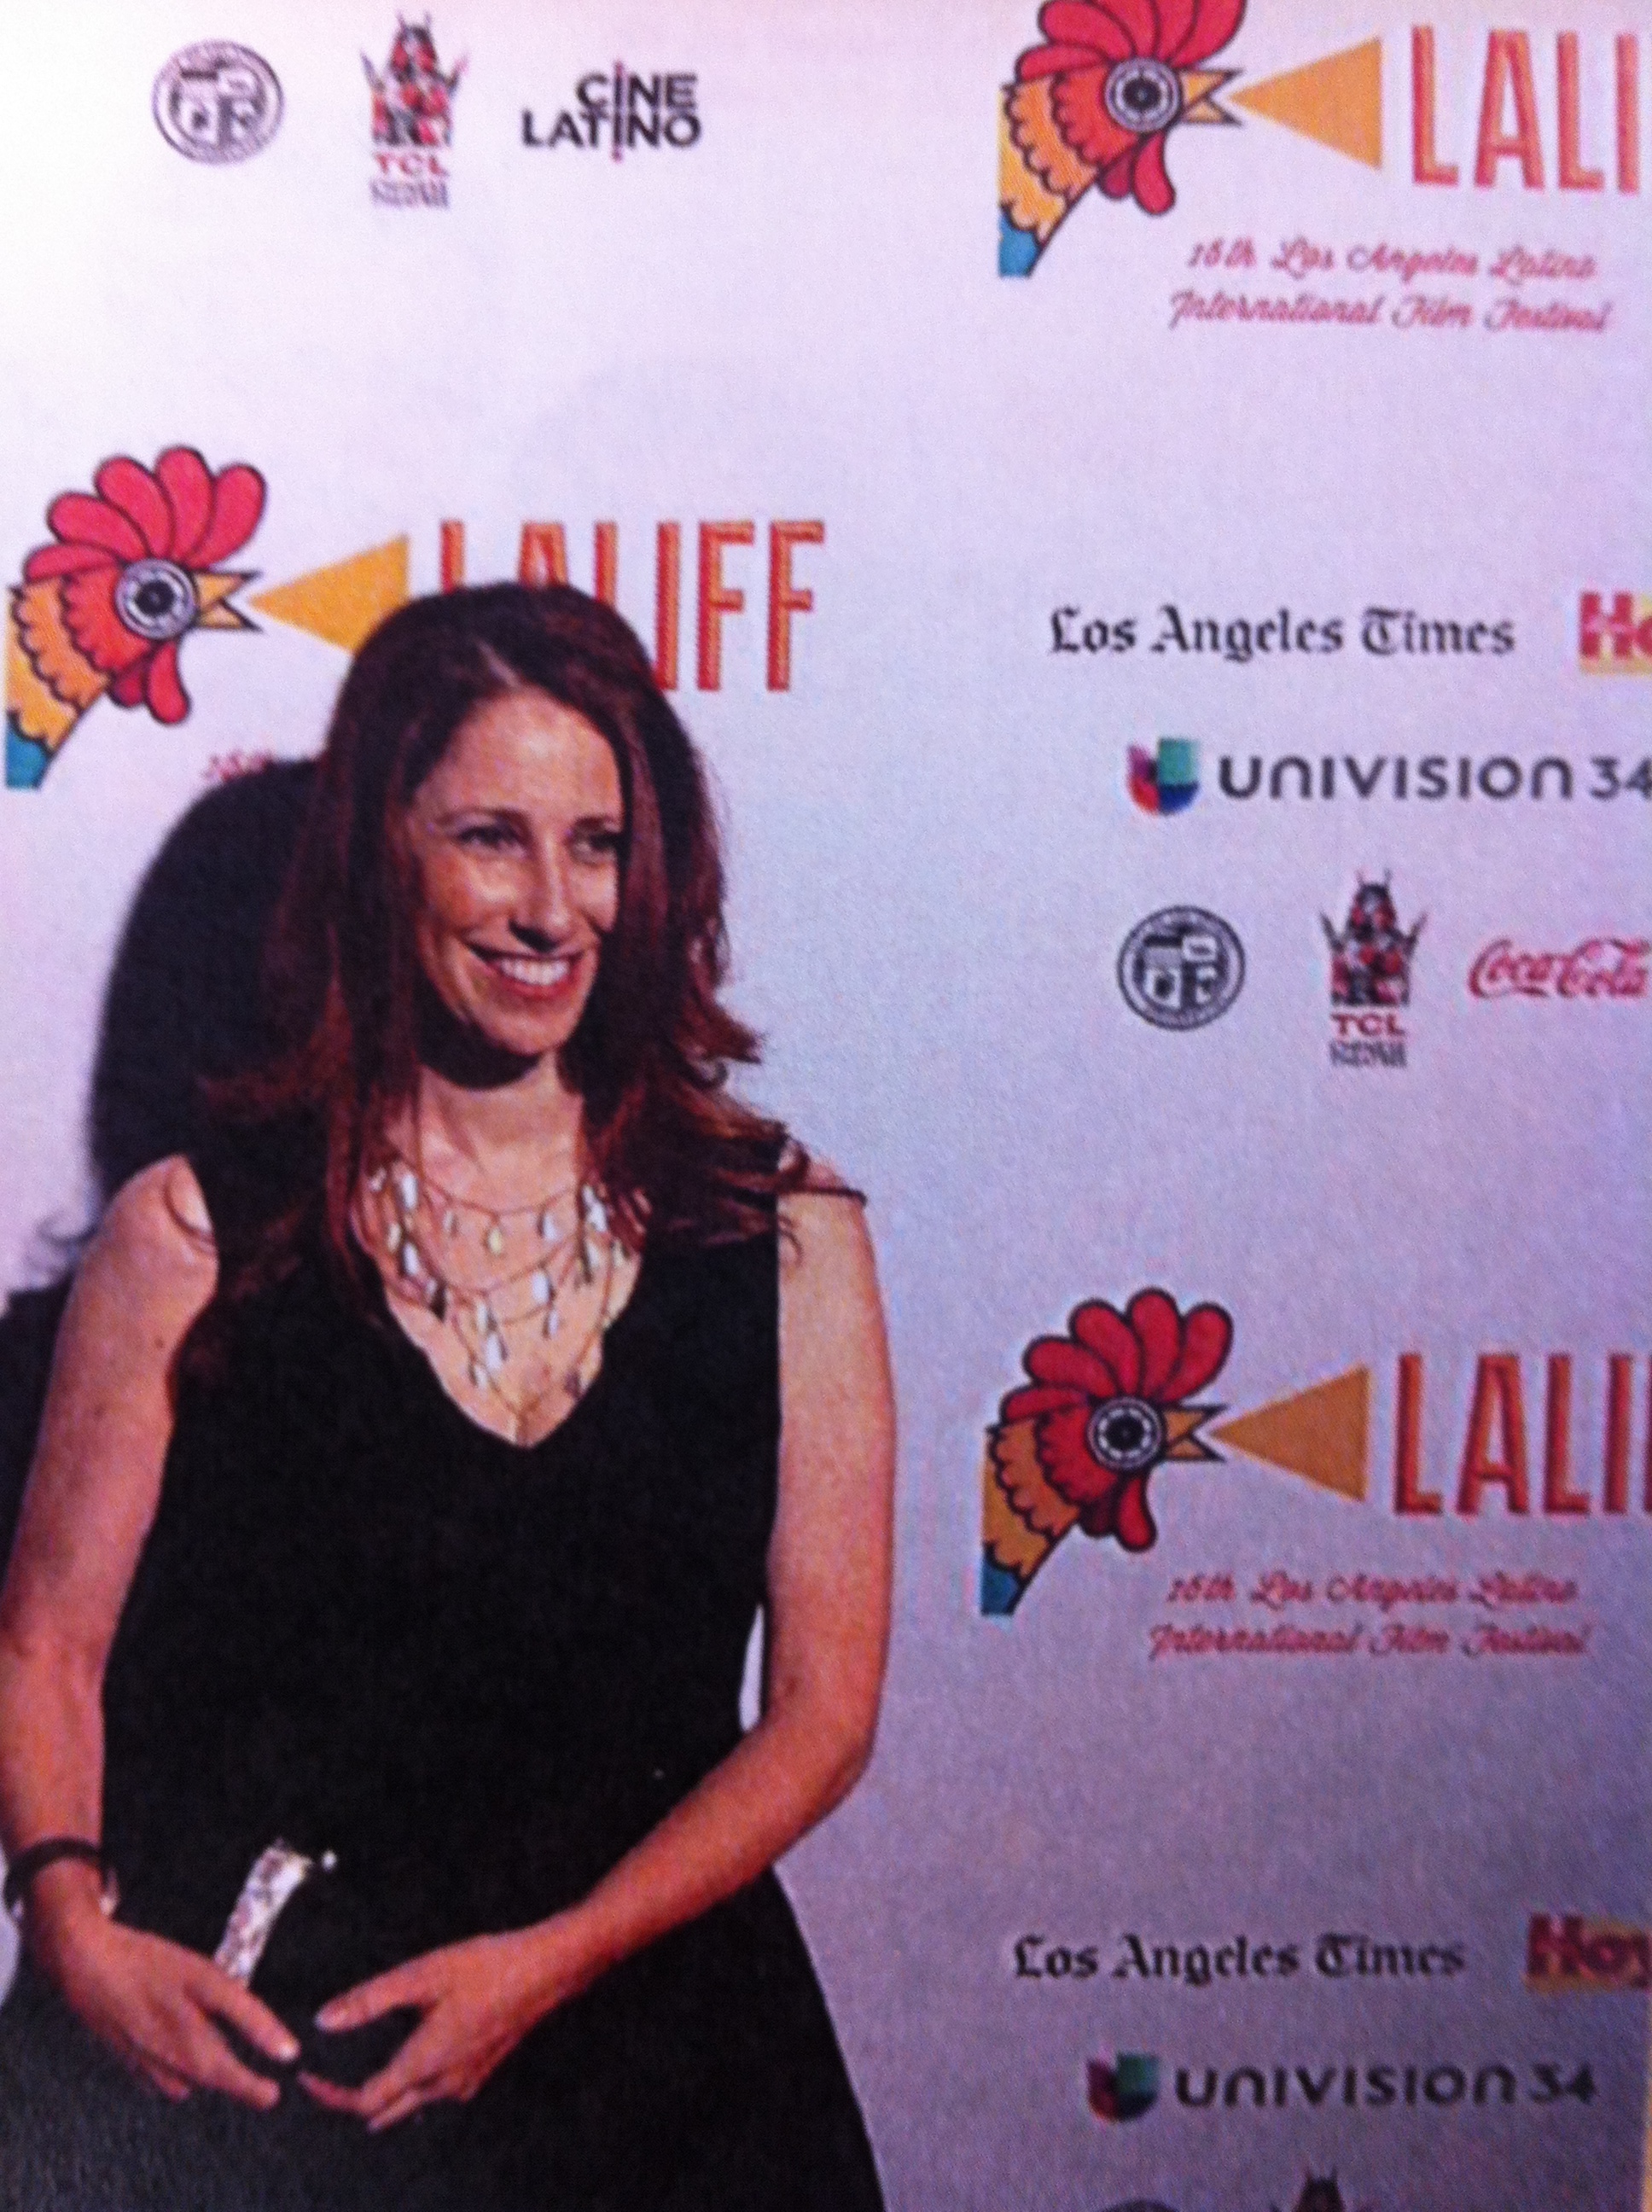 At LALIFF opening night at El Capitan in Hollywood; EL DOCTOR official selection of Oscar-qualifying film festival and sold to PBS and Latino Public Broadcasting.